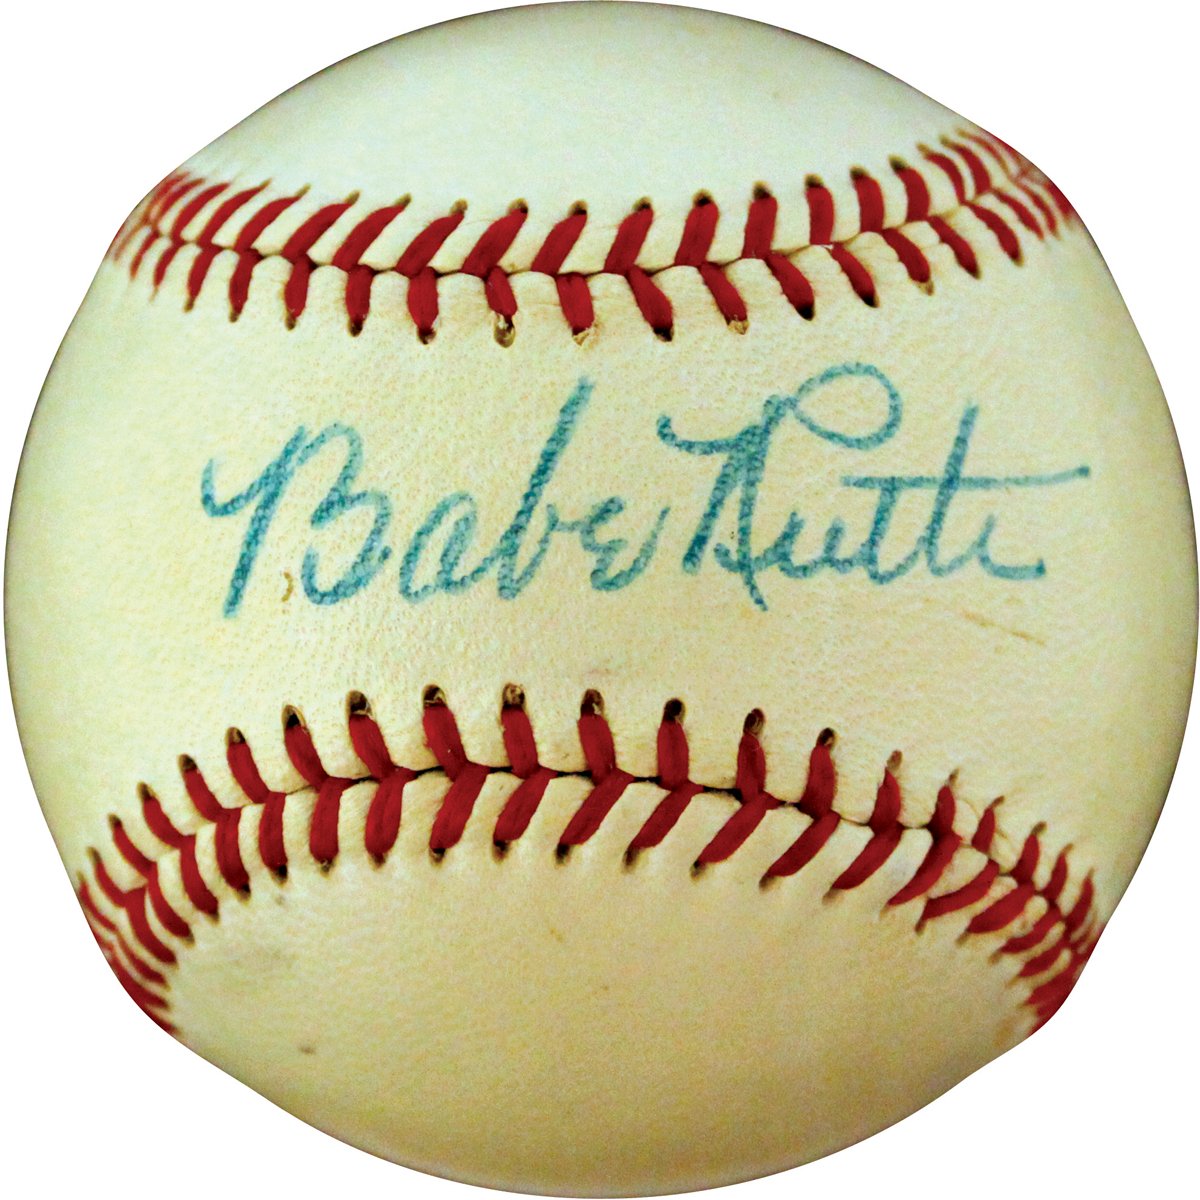 High Grade Autographed Babe Ruth Baseball Sells for $97,000